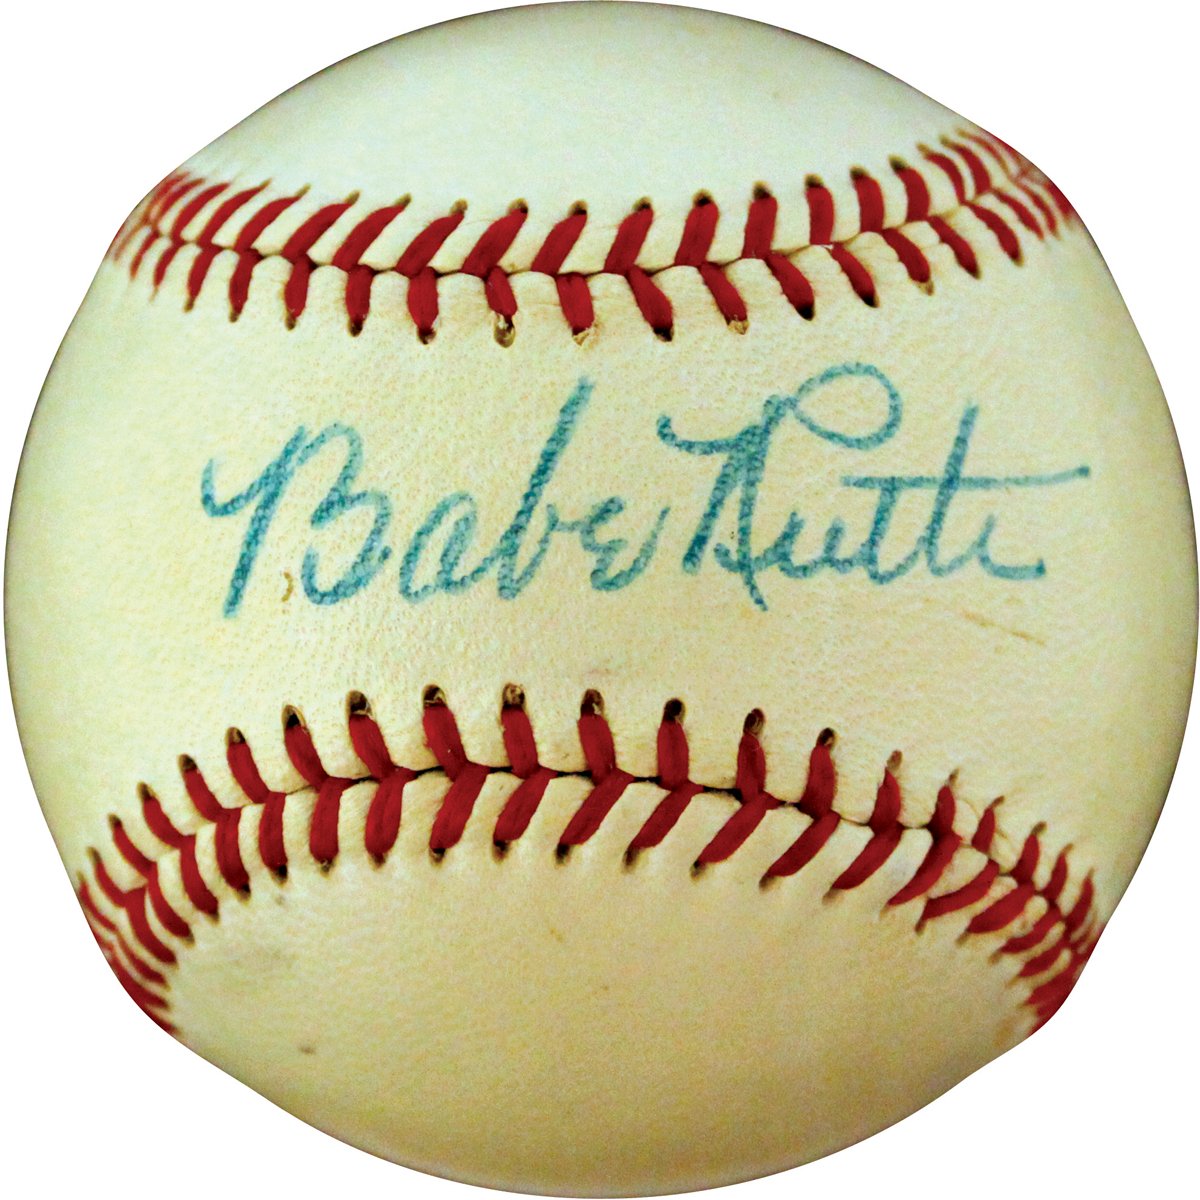 High Grade Autographed Babe Ruth Baseball Sells for $97,000